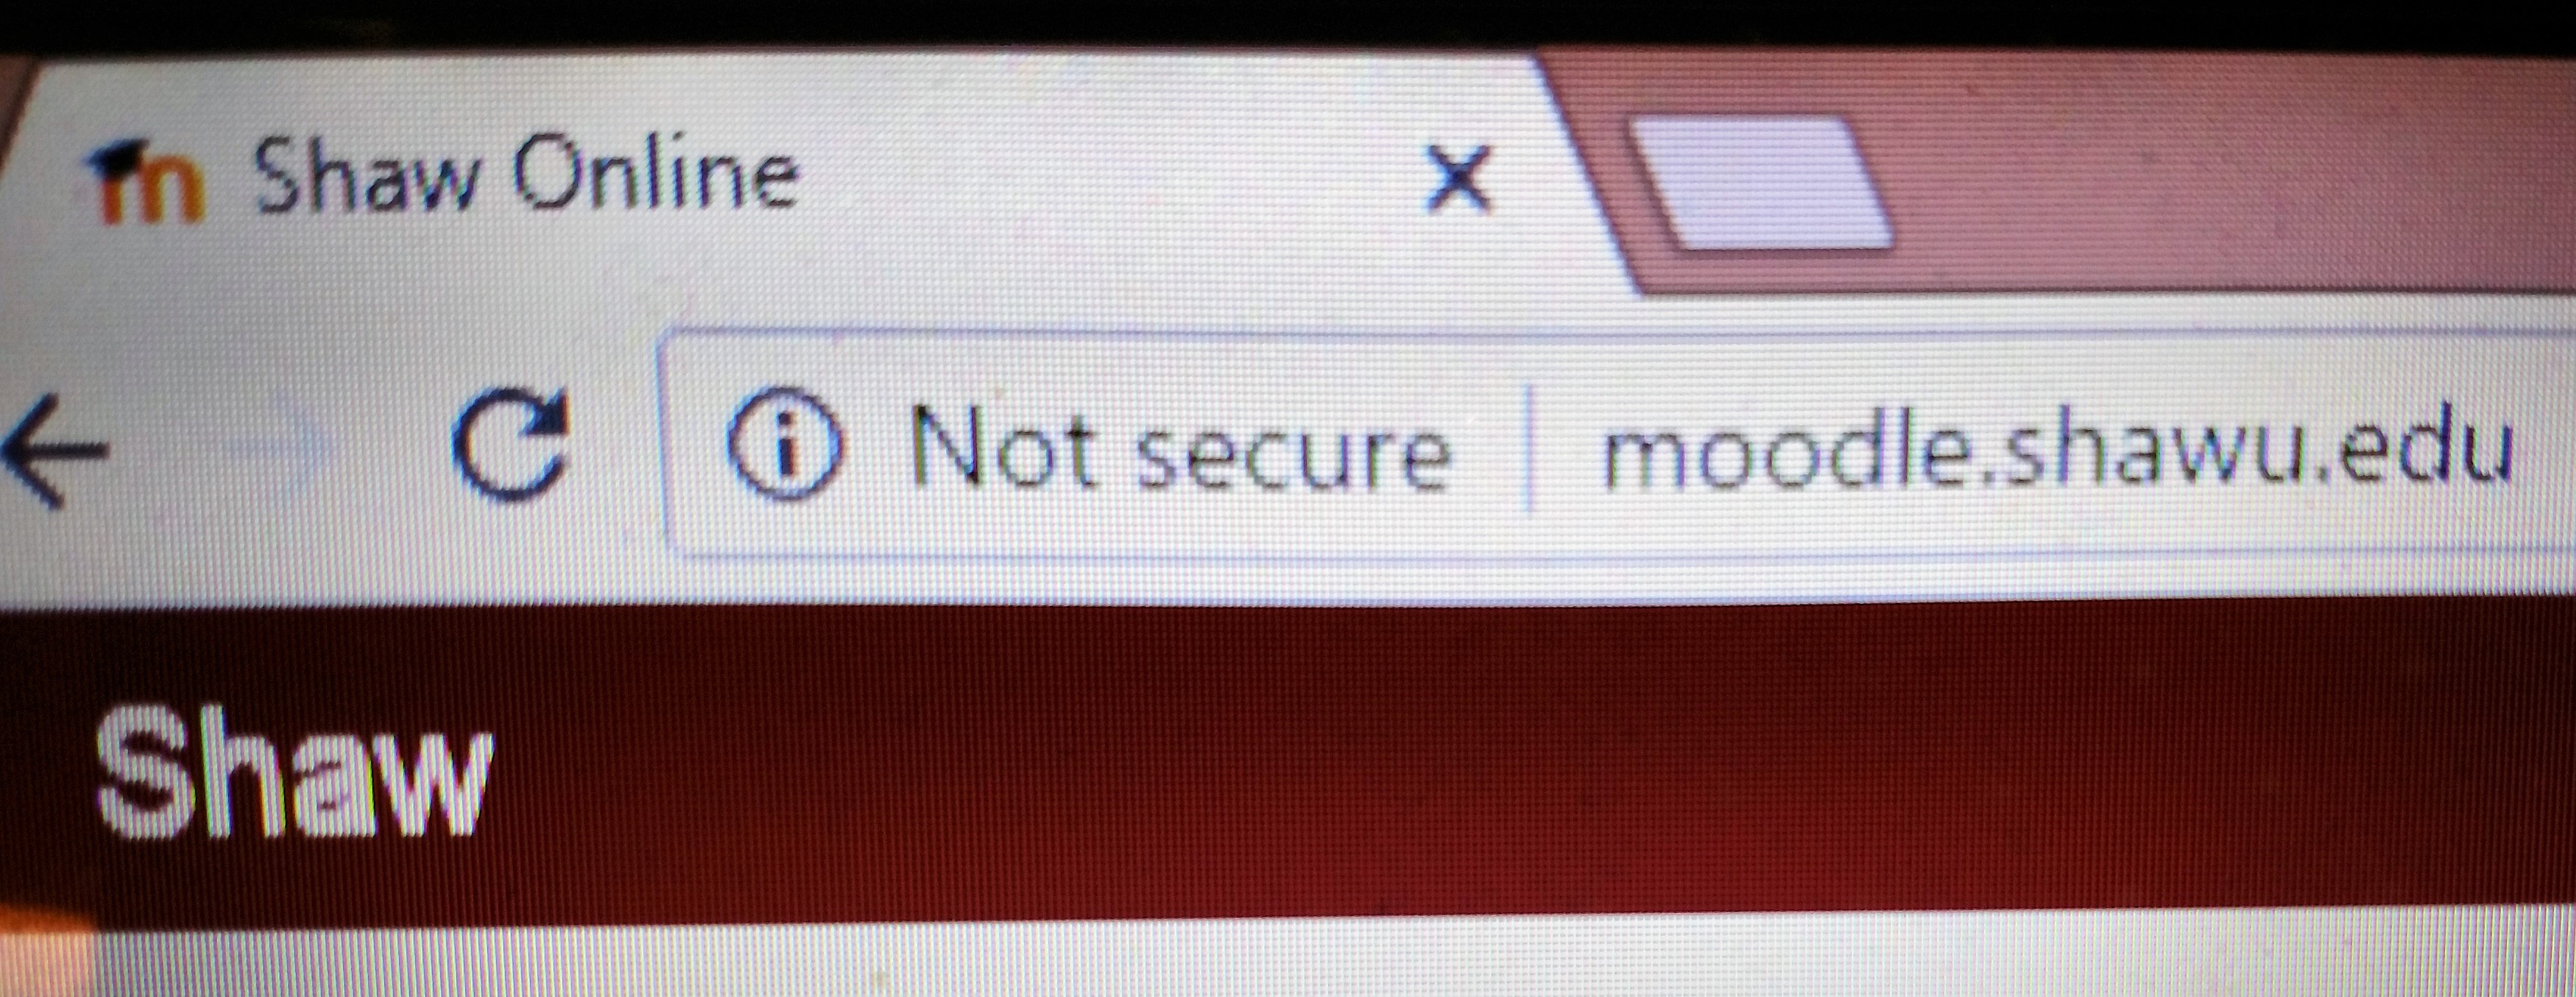 Not Secure Message in Chrome